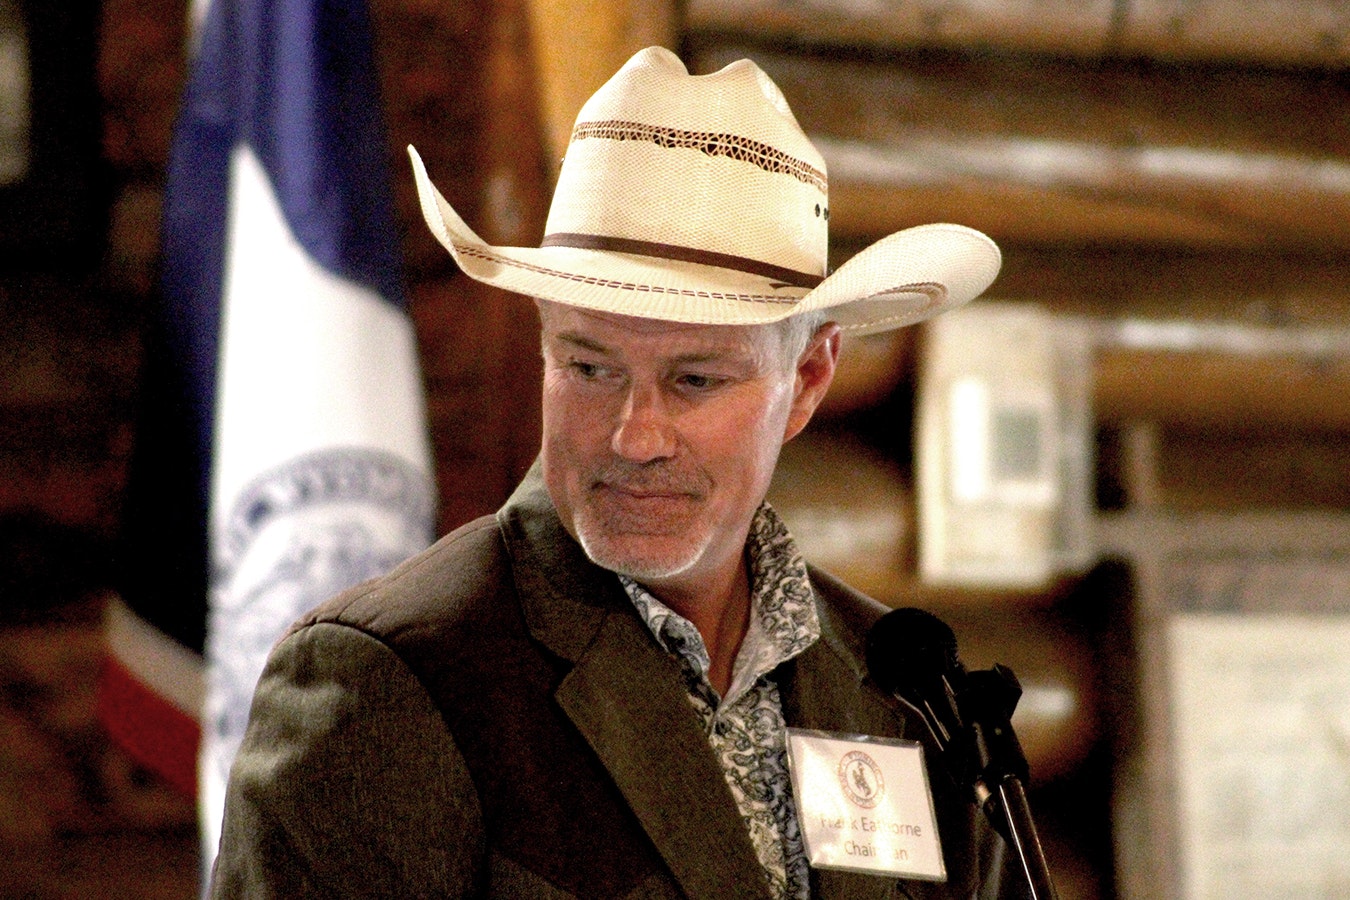 At a Saturday meeting of the Wyoming Republican Central Committee in Laramie, Wyoming GOP Chairman Frank Eathorne doesn't want the Republican National Committee to donate to gay rodeos and LGBTQ causes.